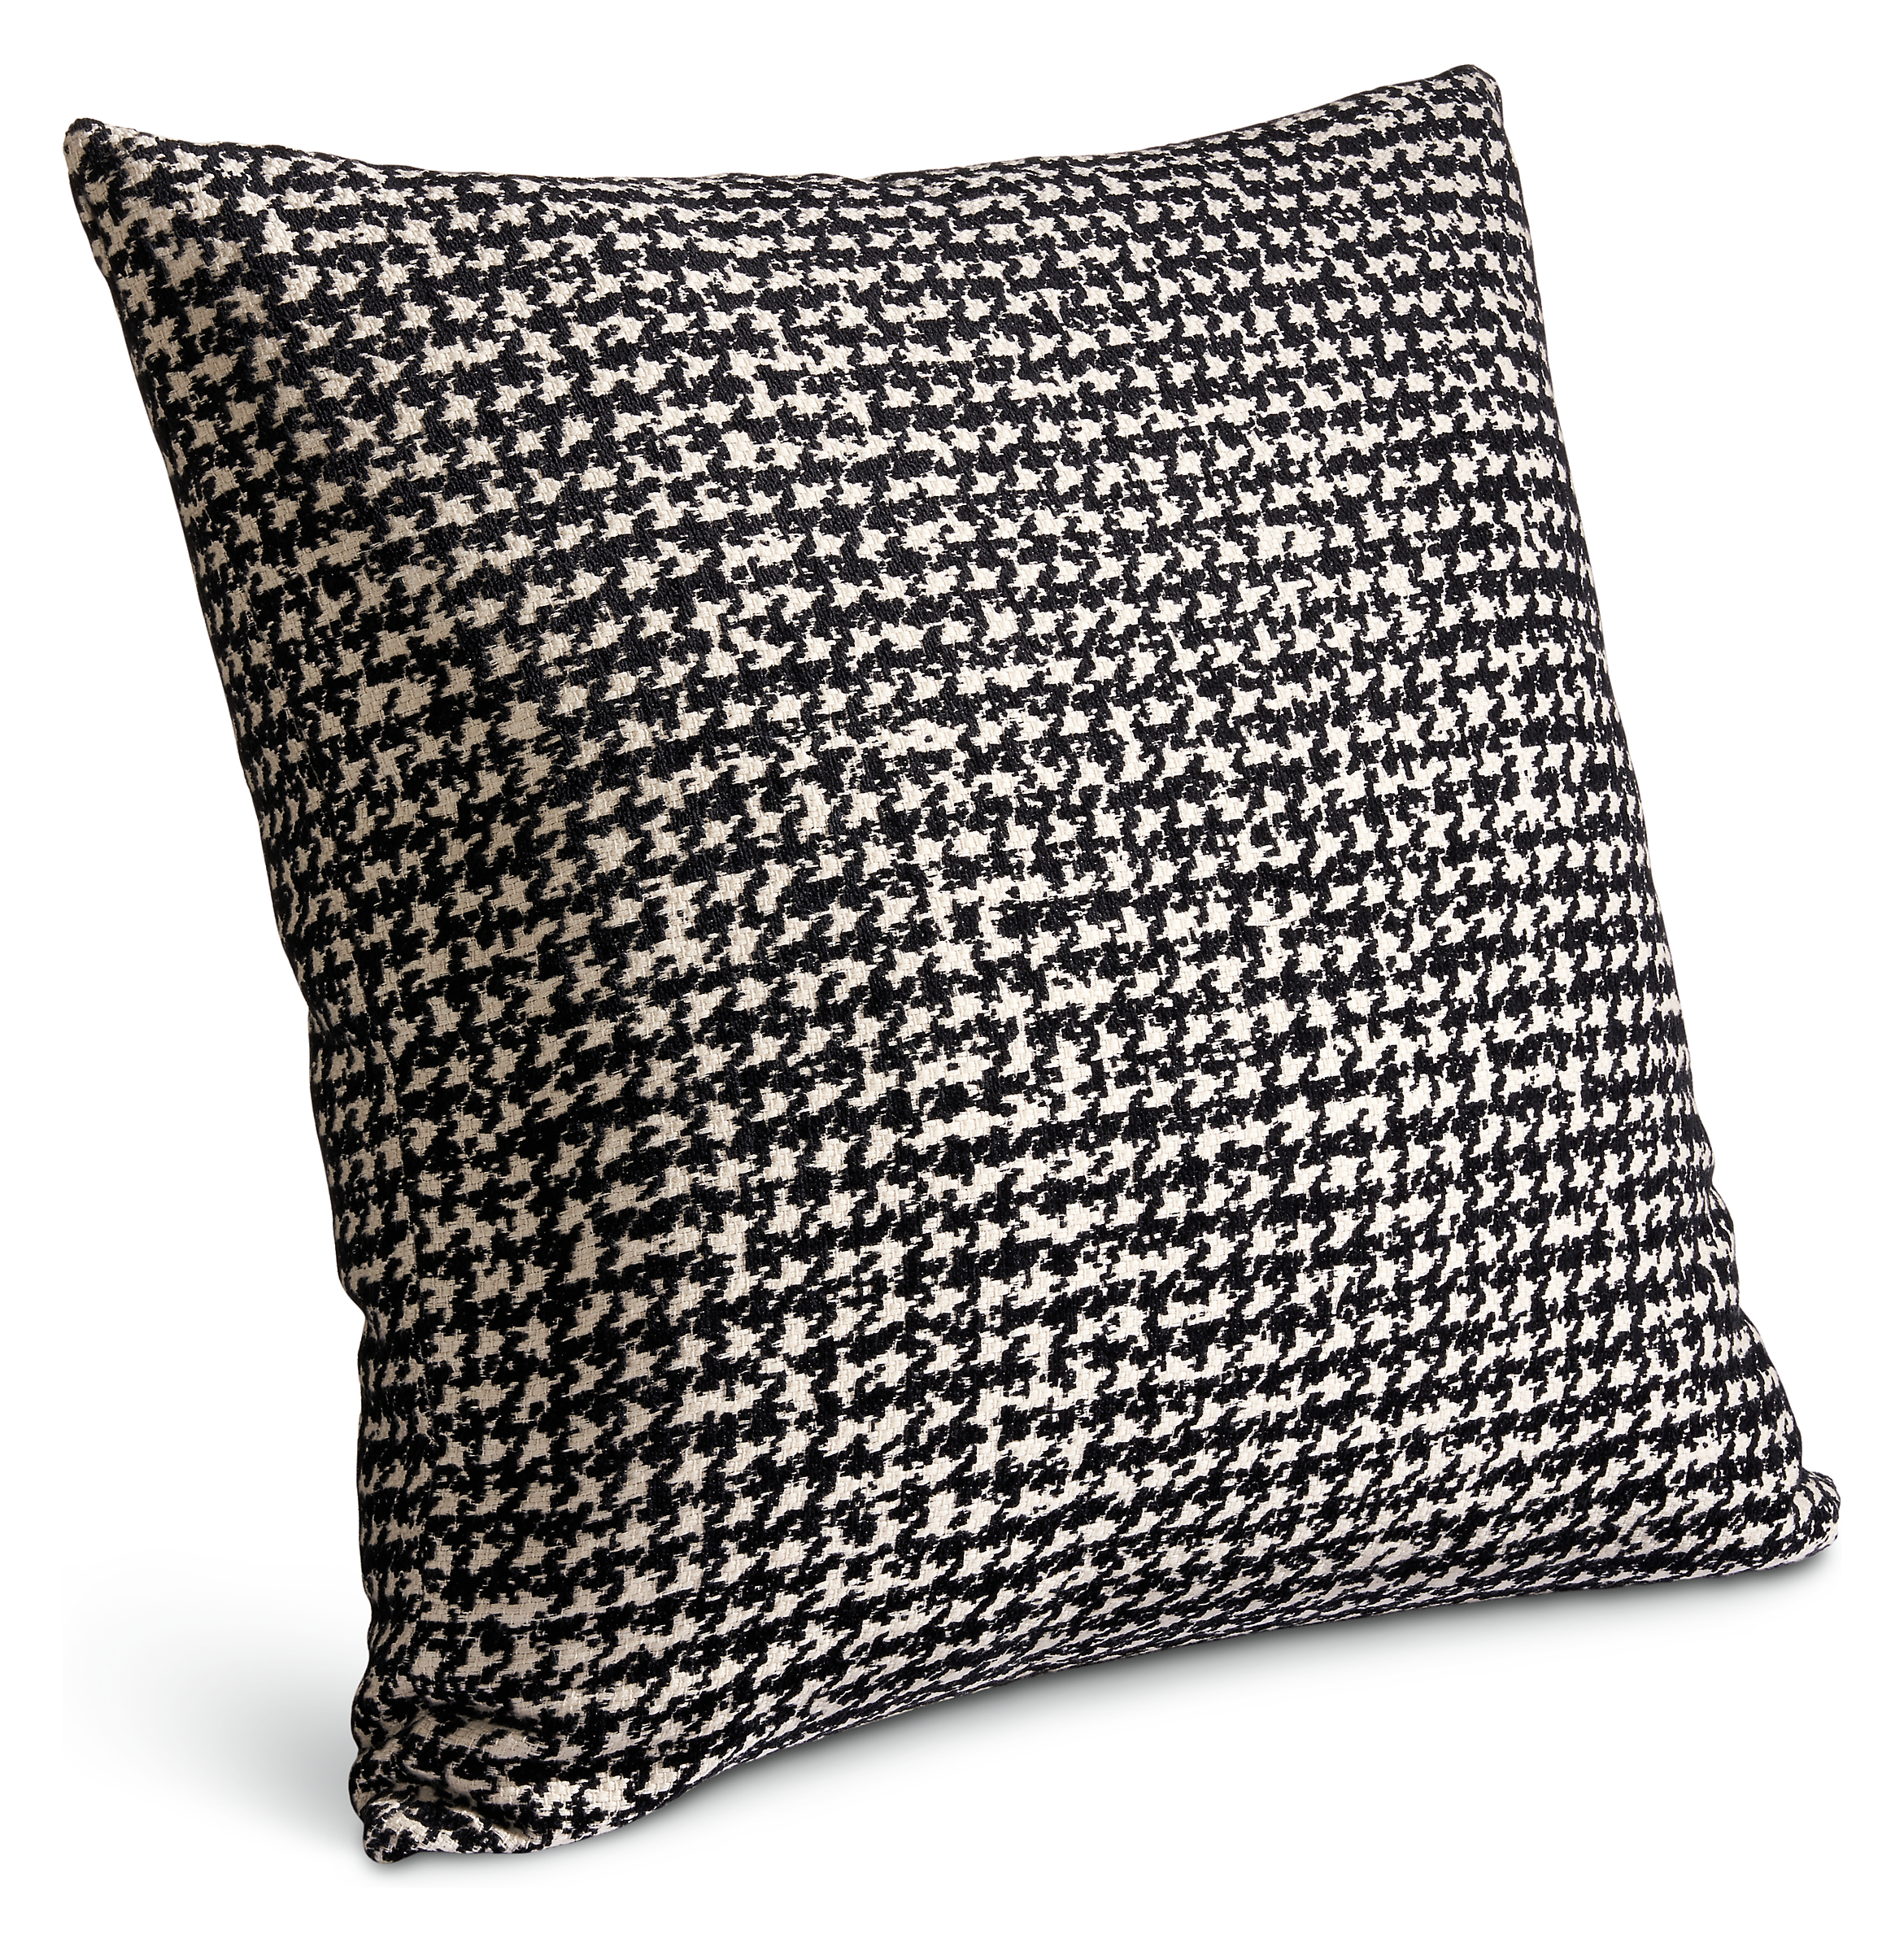 Barnes 24w 24h Throw Pillow Cover in Black/White